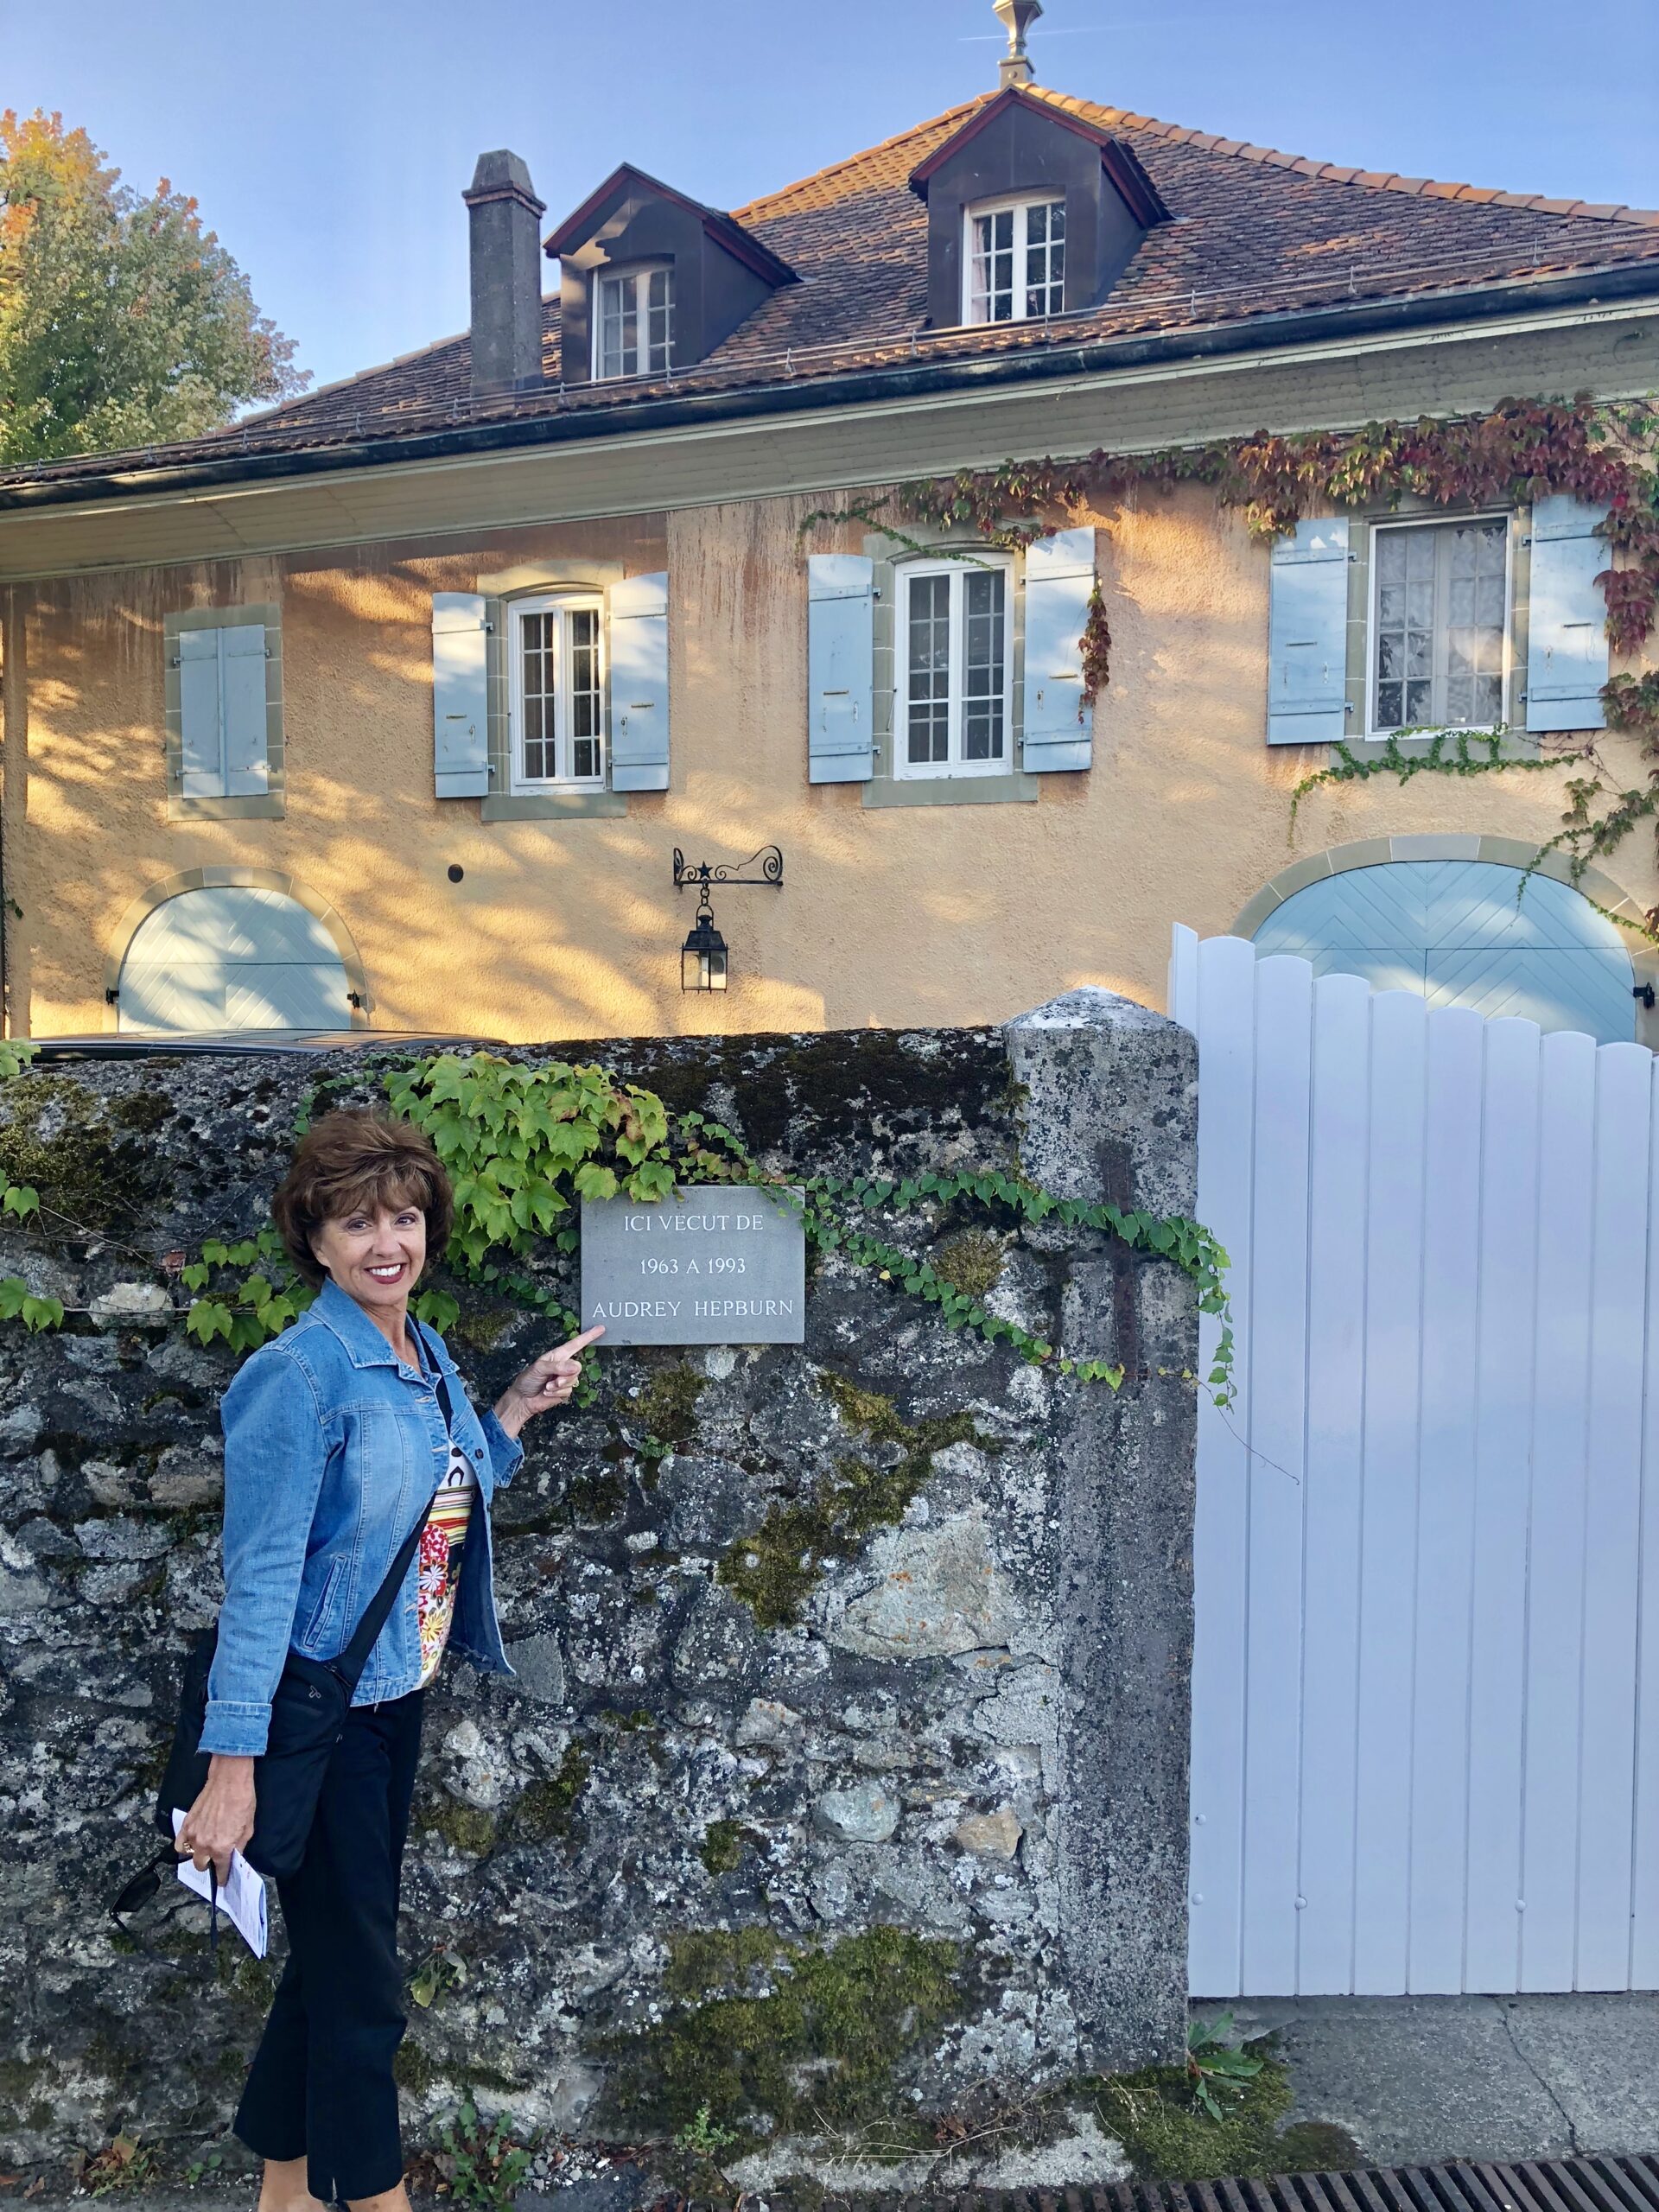 Audrey lived here in La Paisible for 30 years